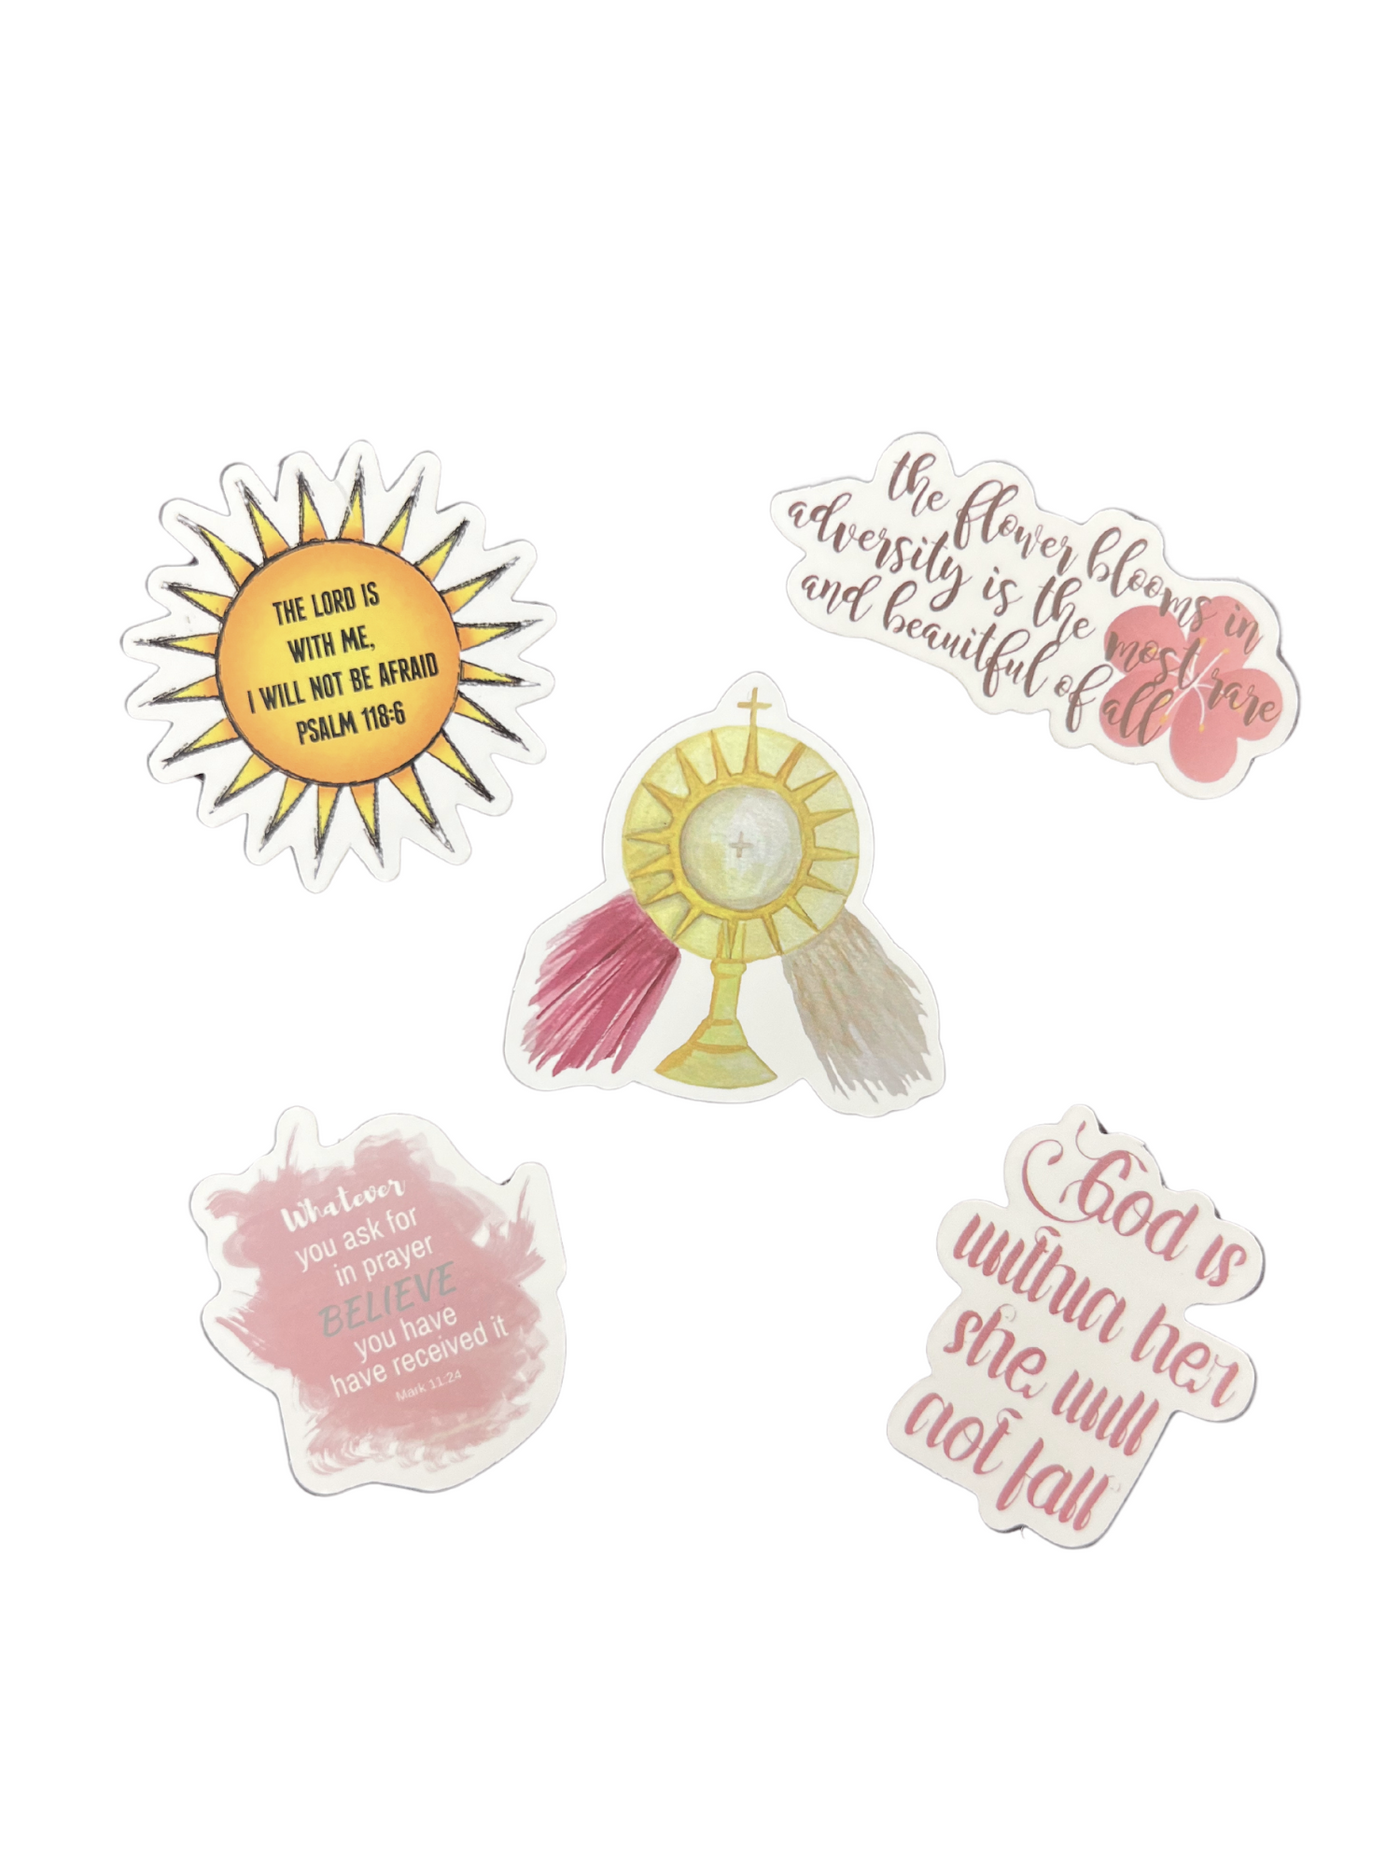 Set of 5 Christian stickers in dusty pink on white background.